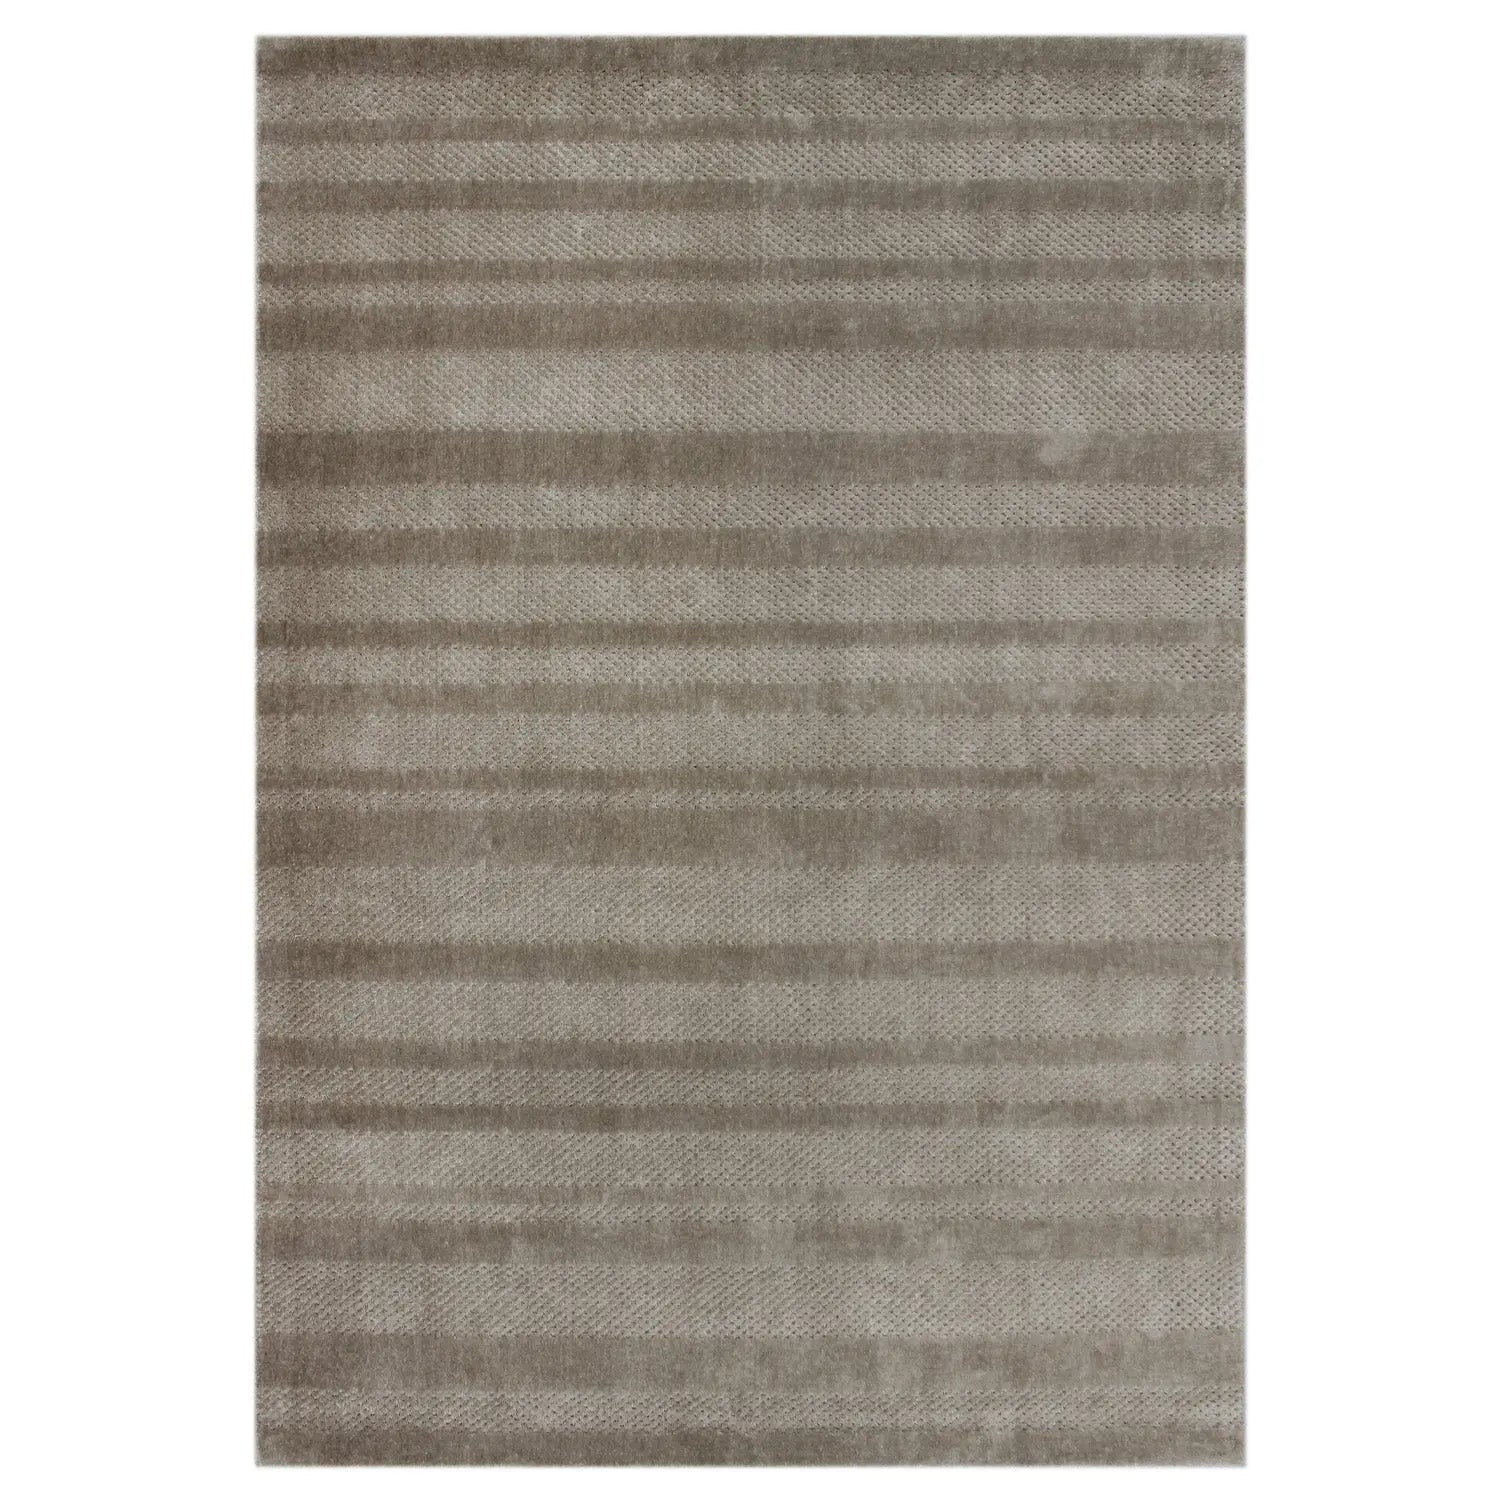 Lacey Plain Beige Wool Rug - Rugs - Rugs a Million